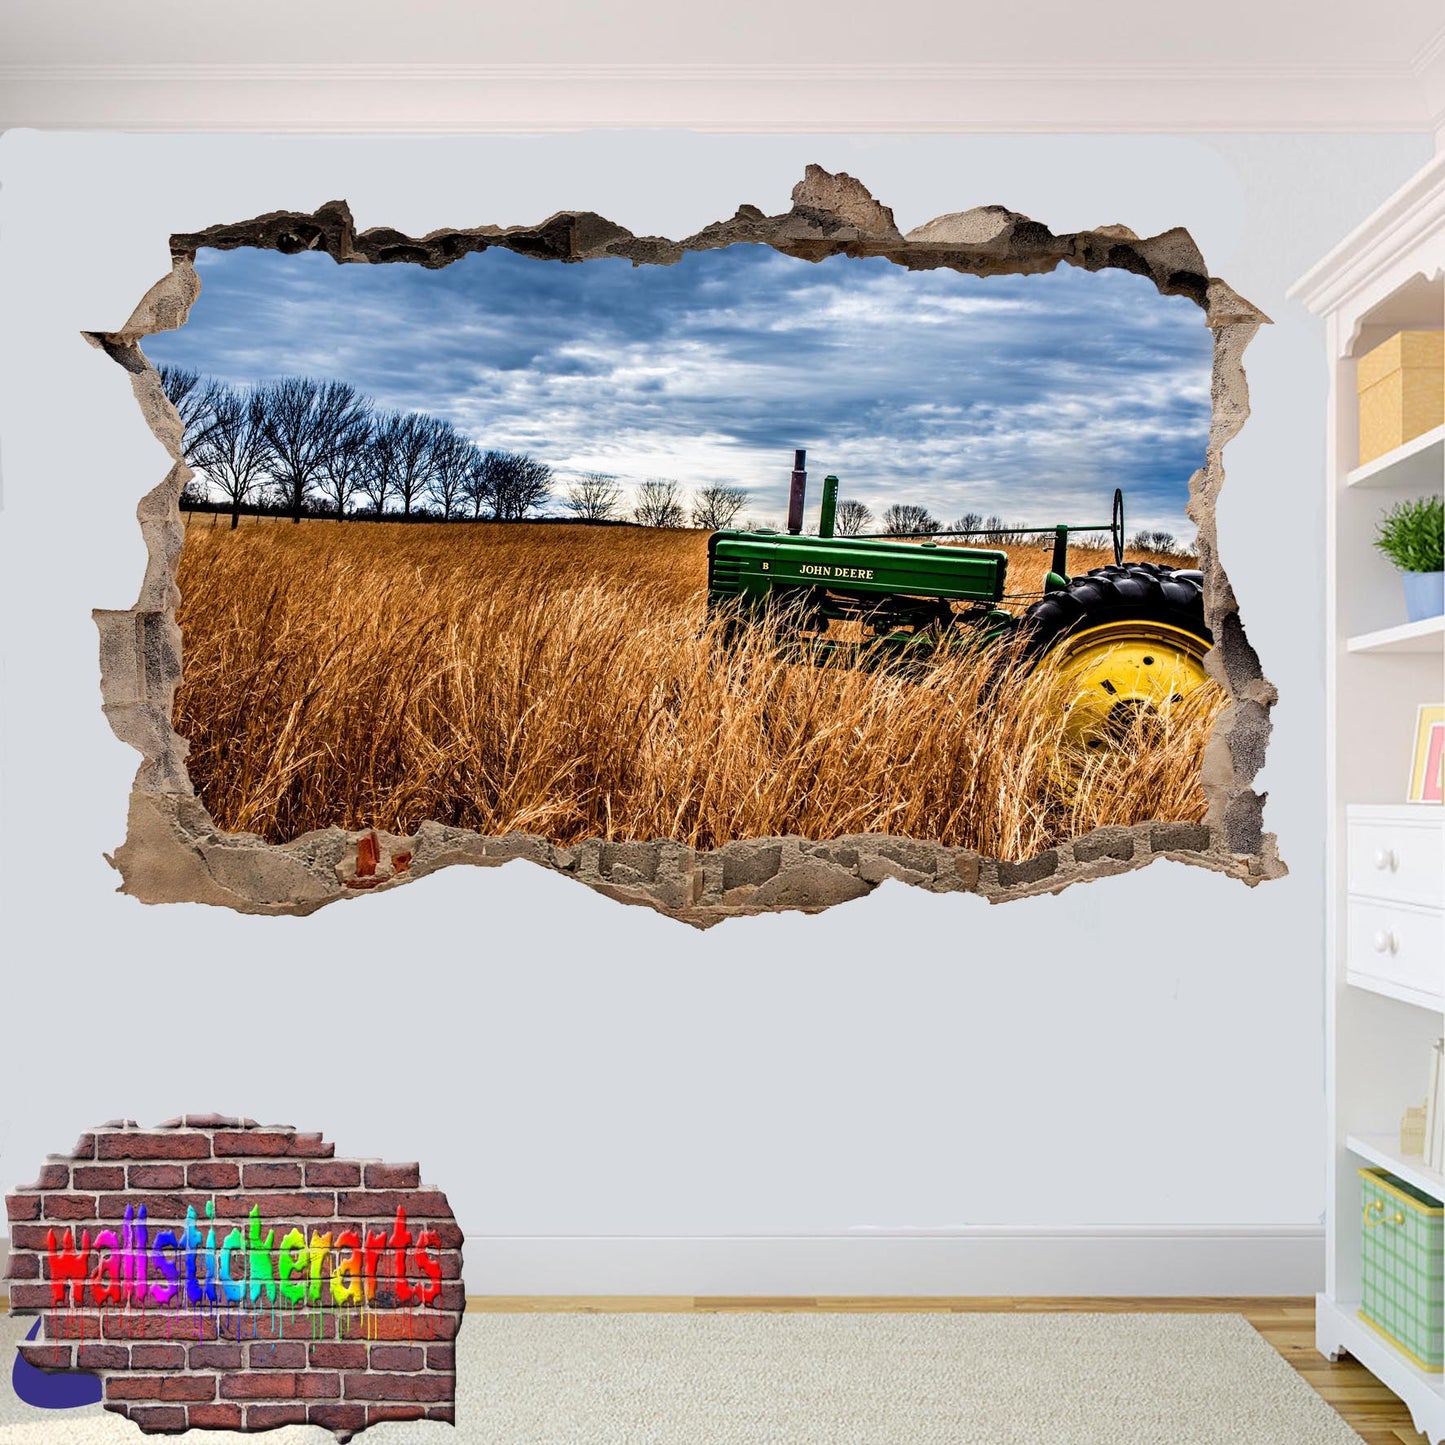 VINTAGE OLD JOHN DEERE TRACTOR AGRICULTURAL FARMING TOOLS POSTER WALL STICKER